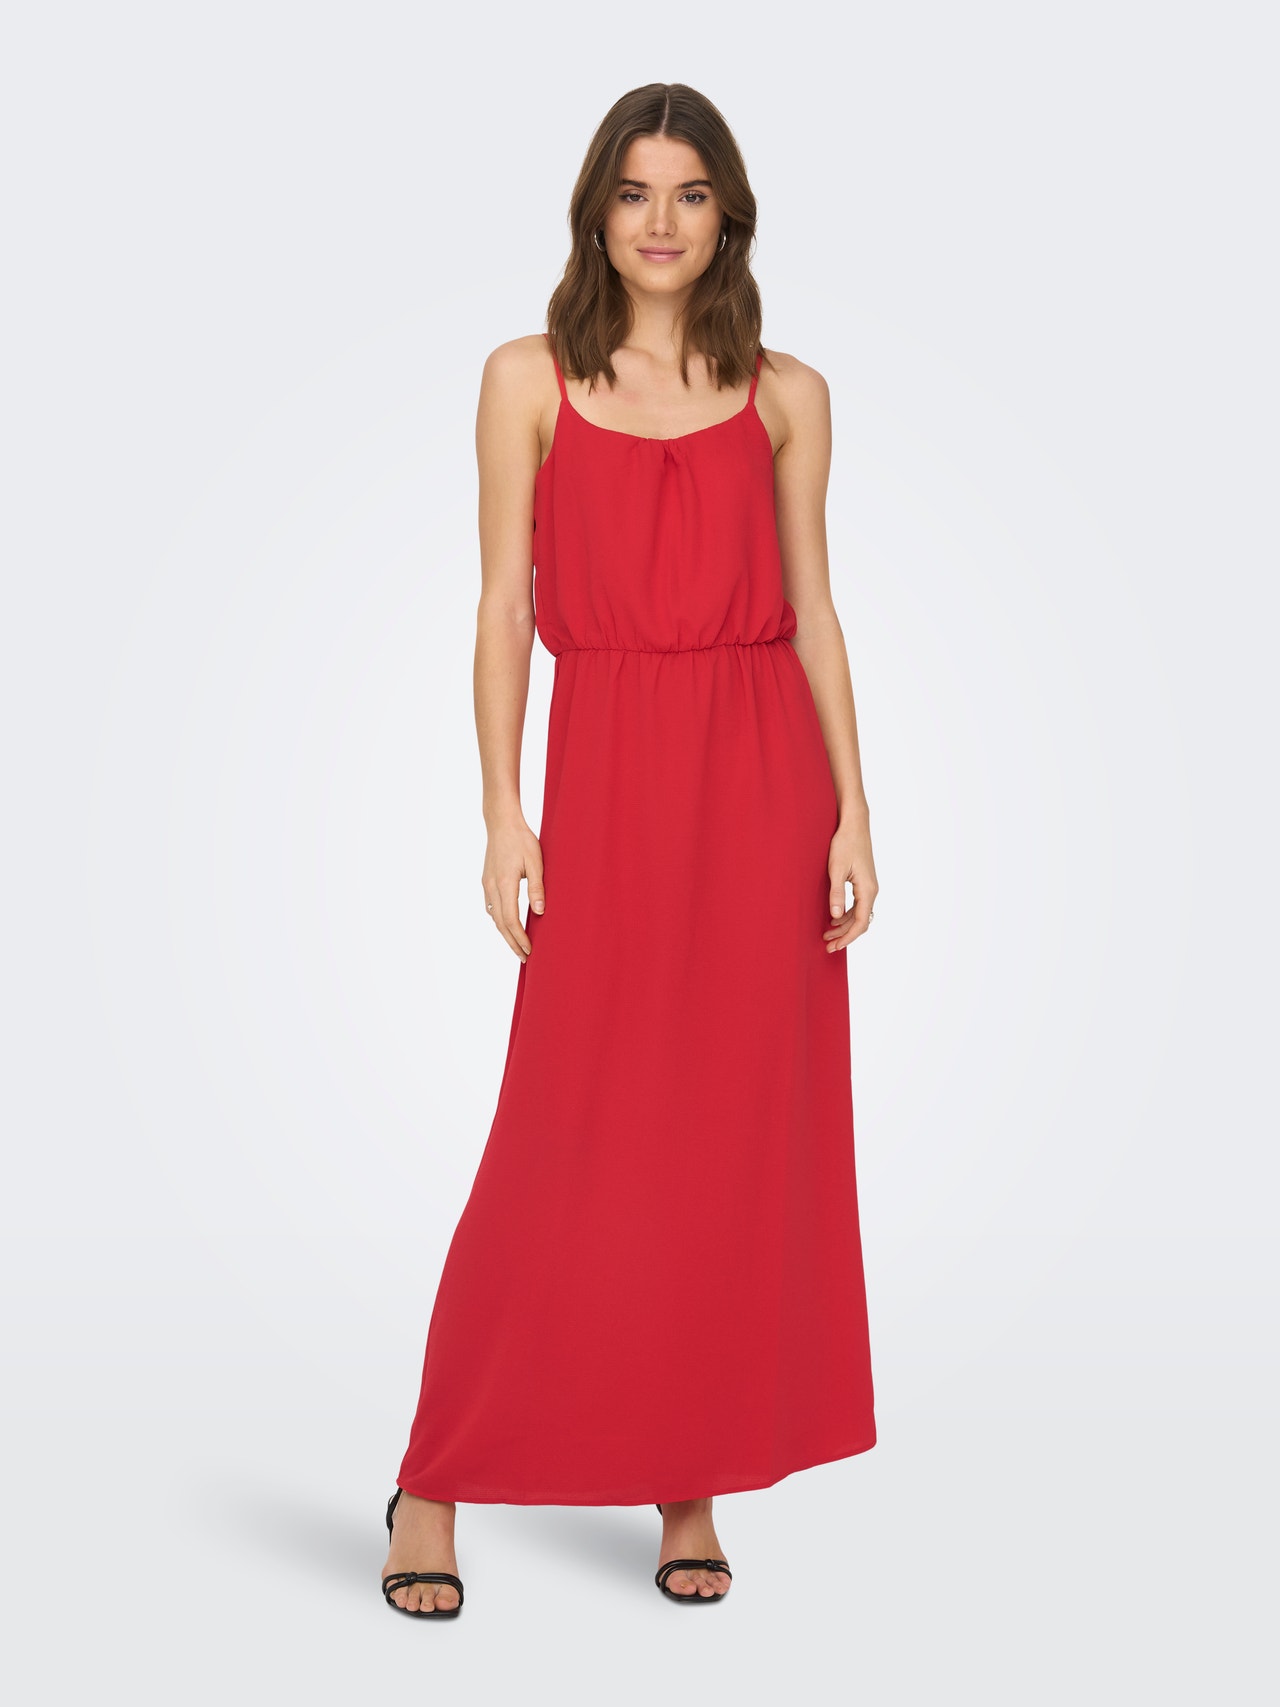 ONLY Couleur unie Robe longue -Mars Red - 15222218